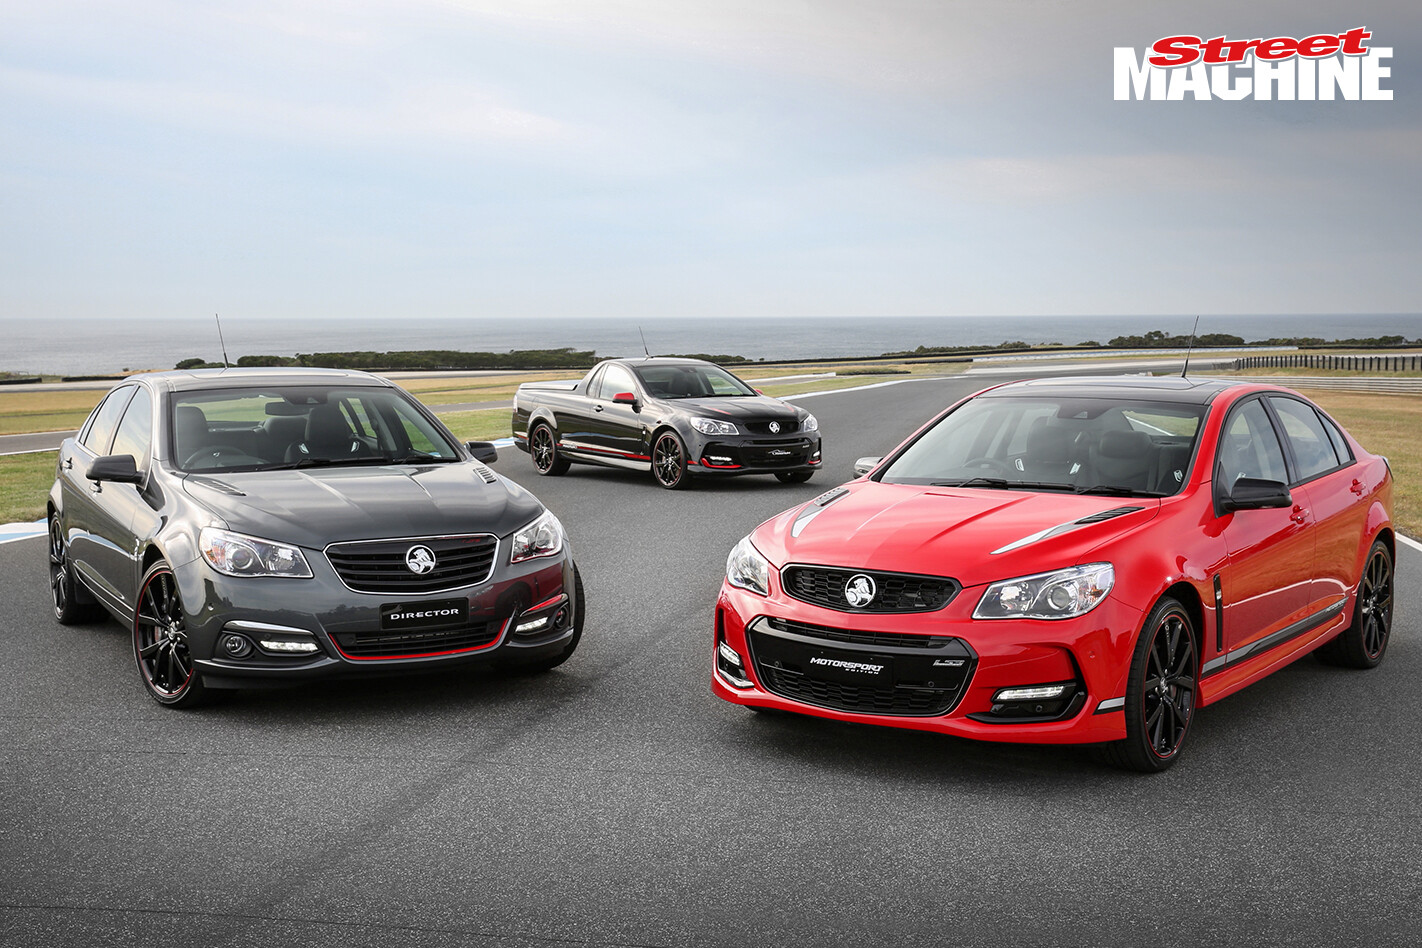 HOLDEN COMMODORE DIRECTOR, MOTORSPORT AND MAGNUM EDITIONS ANNOUNCED